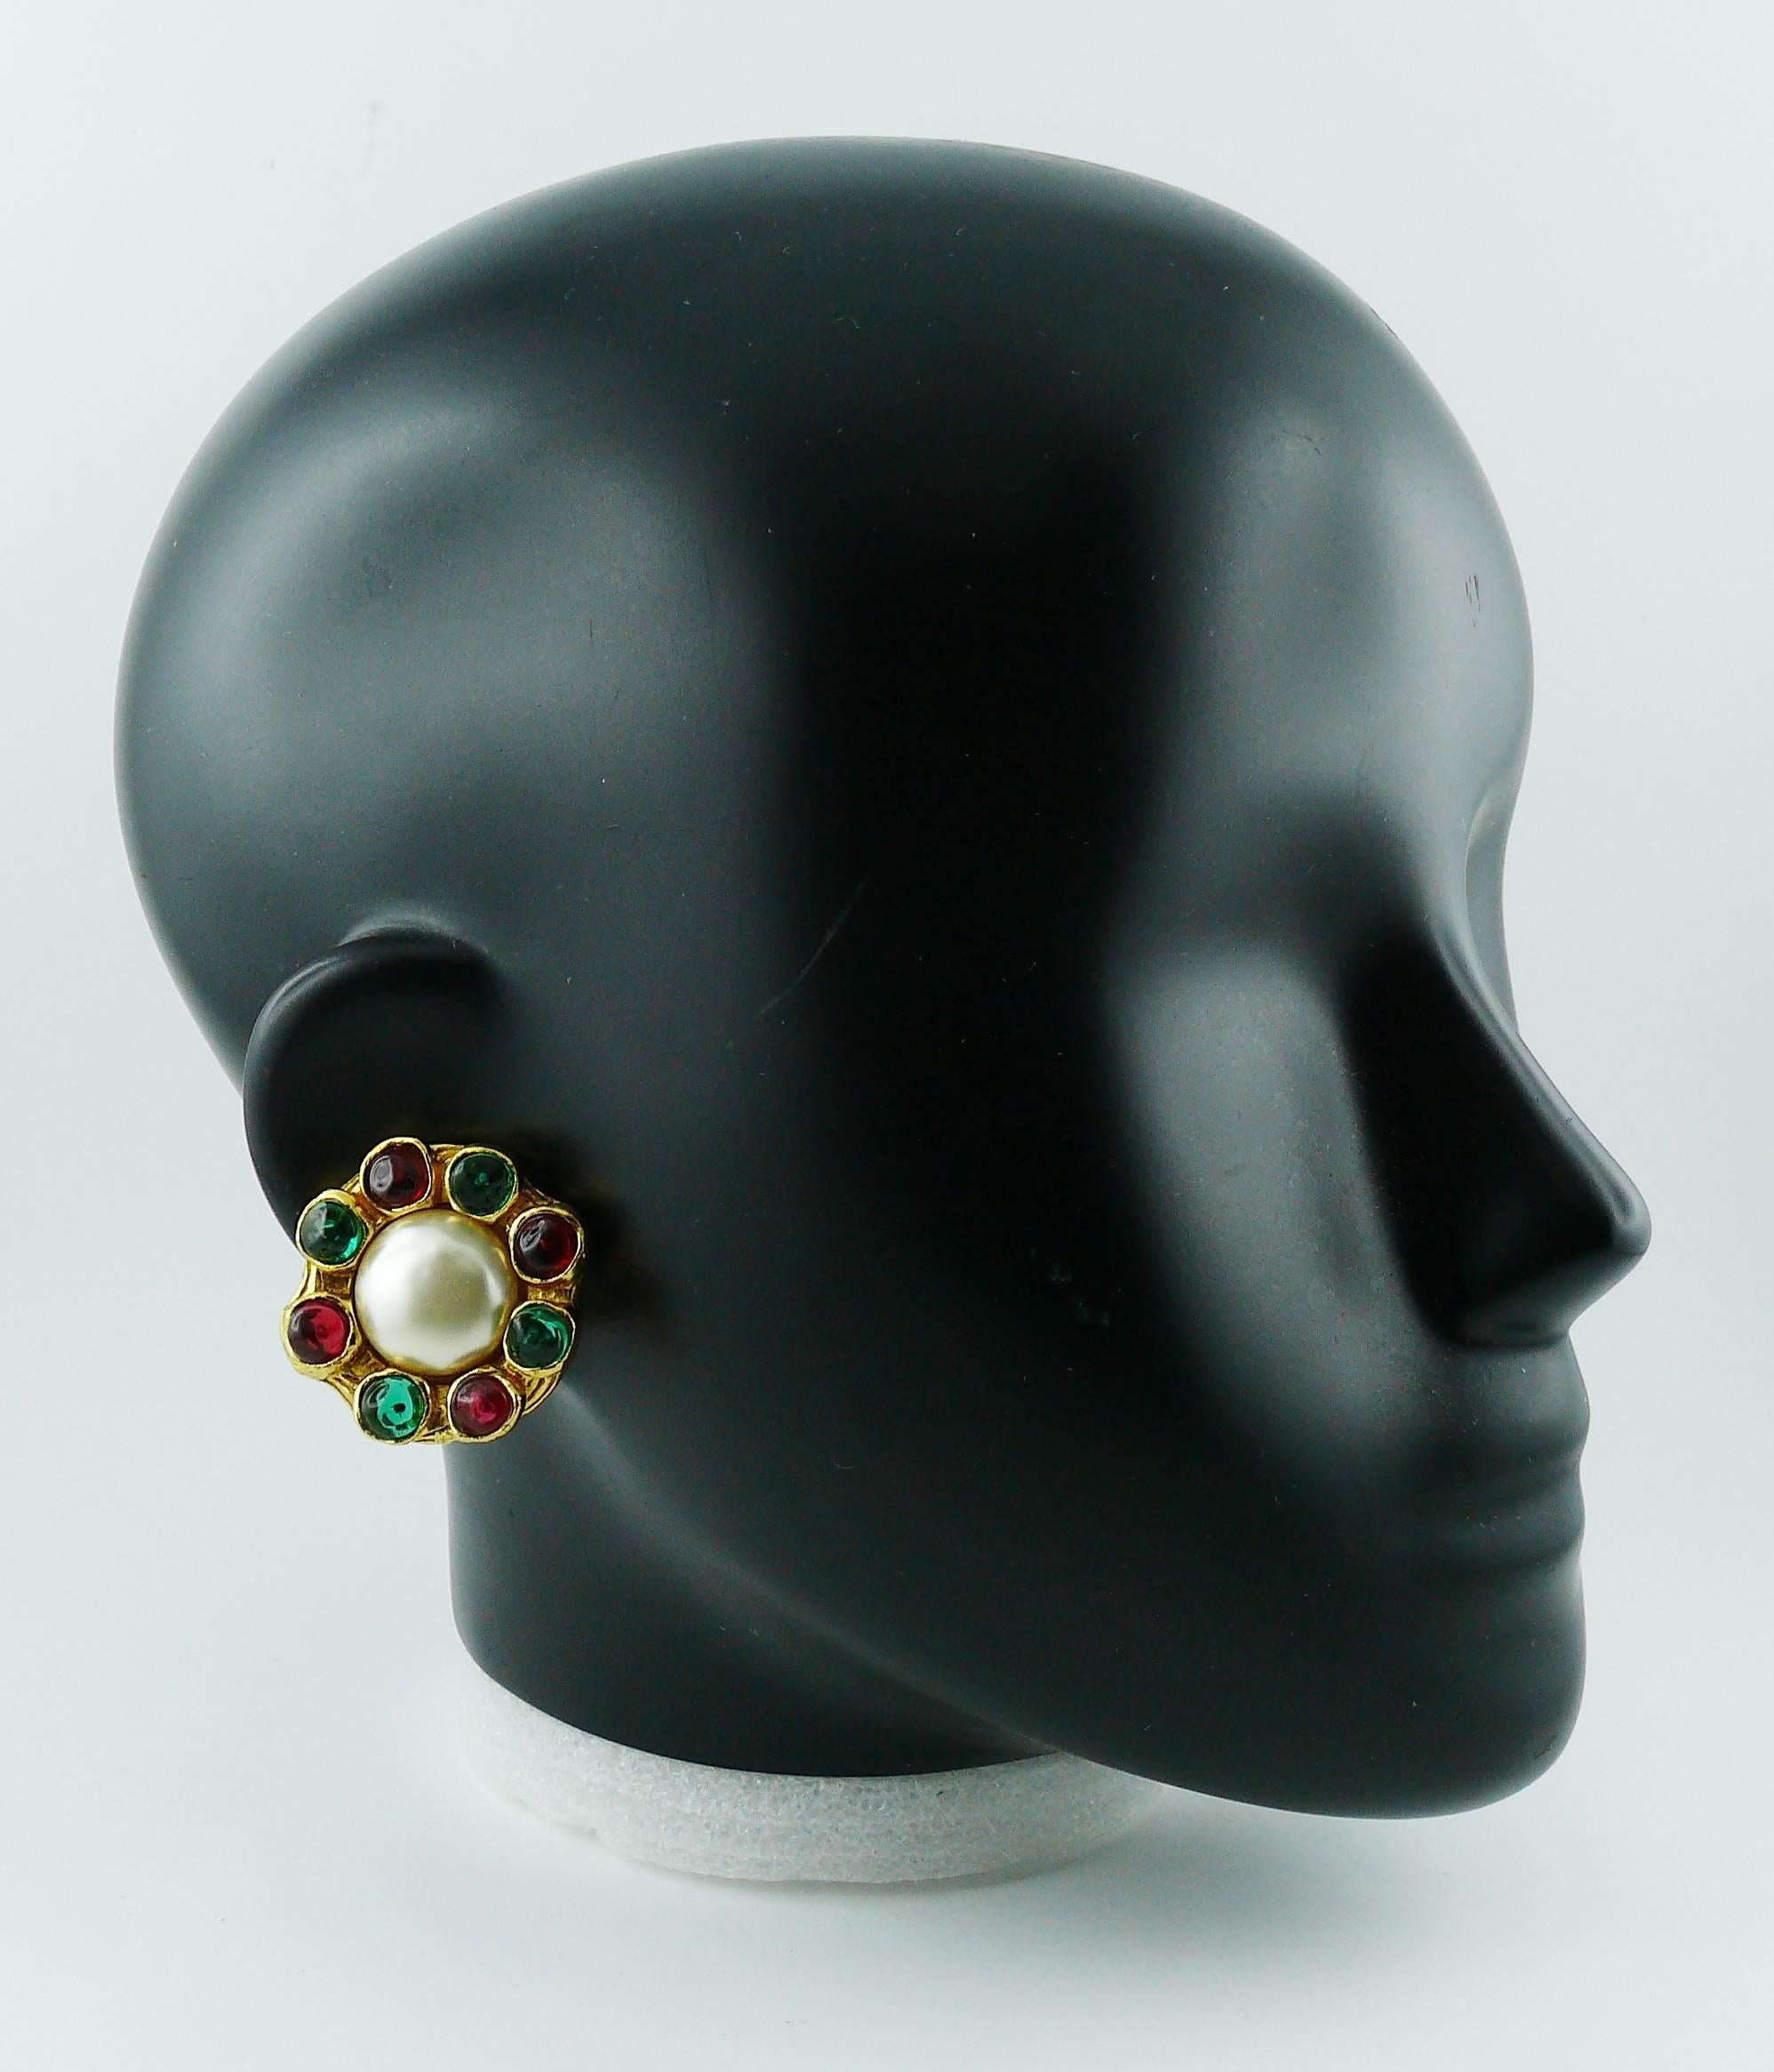 CHANEL vintage gold toned clip-on earrings featuring a large faux pearl center surrounded by red-green MAISON GRIPOIX glass cabochons.

Marked CHANEL Made in France.

Indicative measurements : diameter approx. 3.5 cm (1.38 inches).

JEWELRY